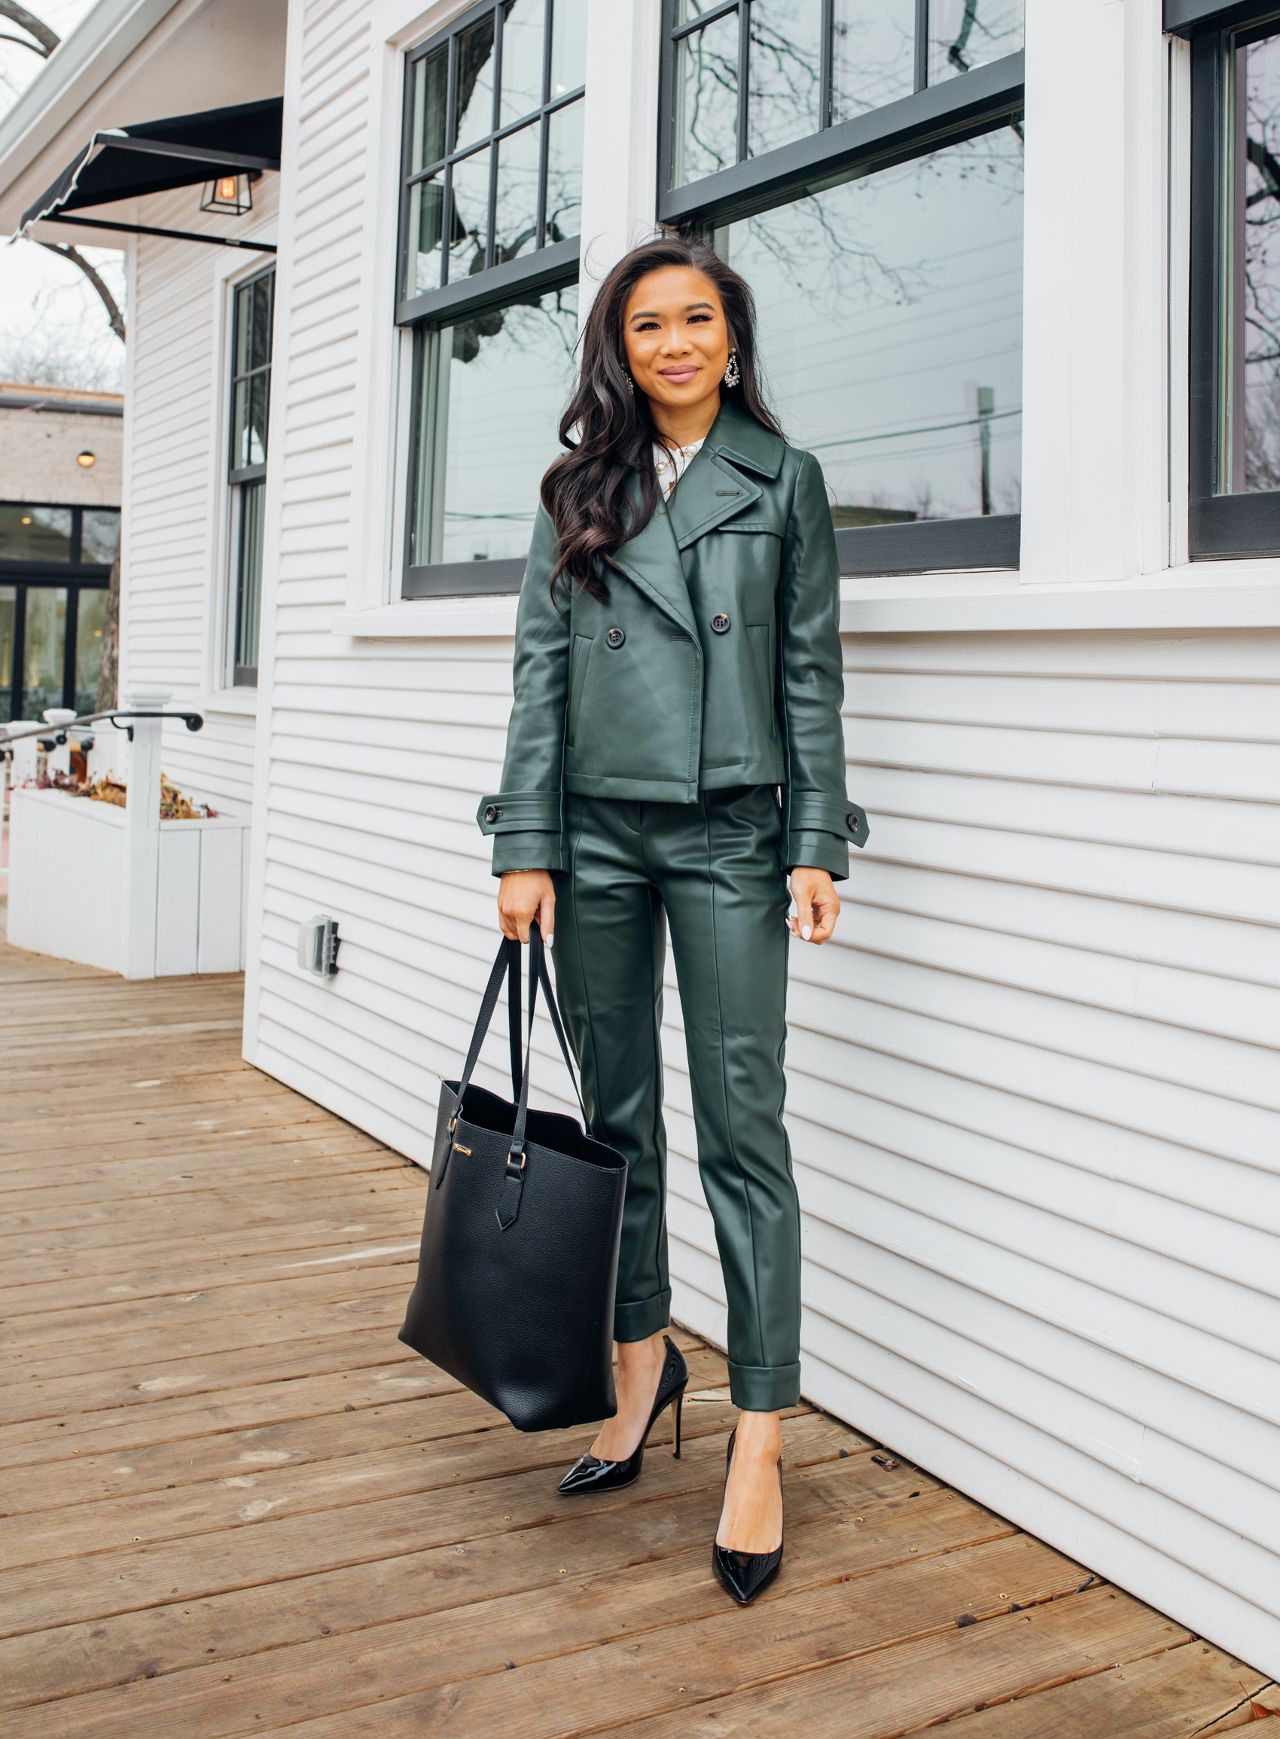 The Complete Petite Fashion Guide to Wearing Faux Leather